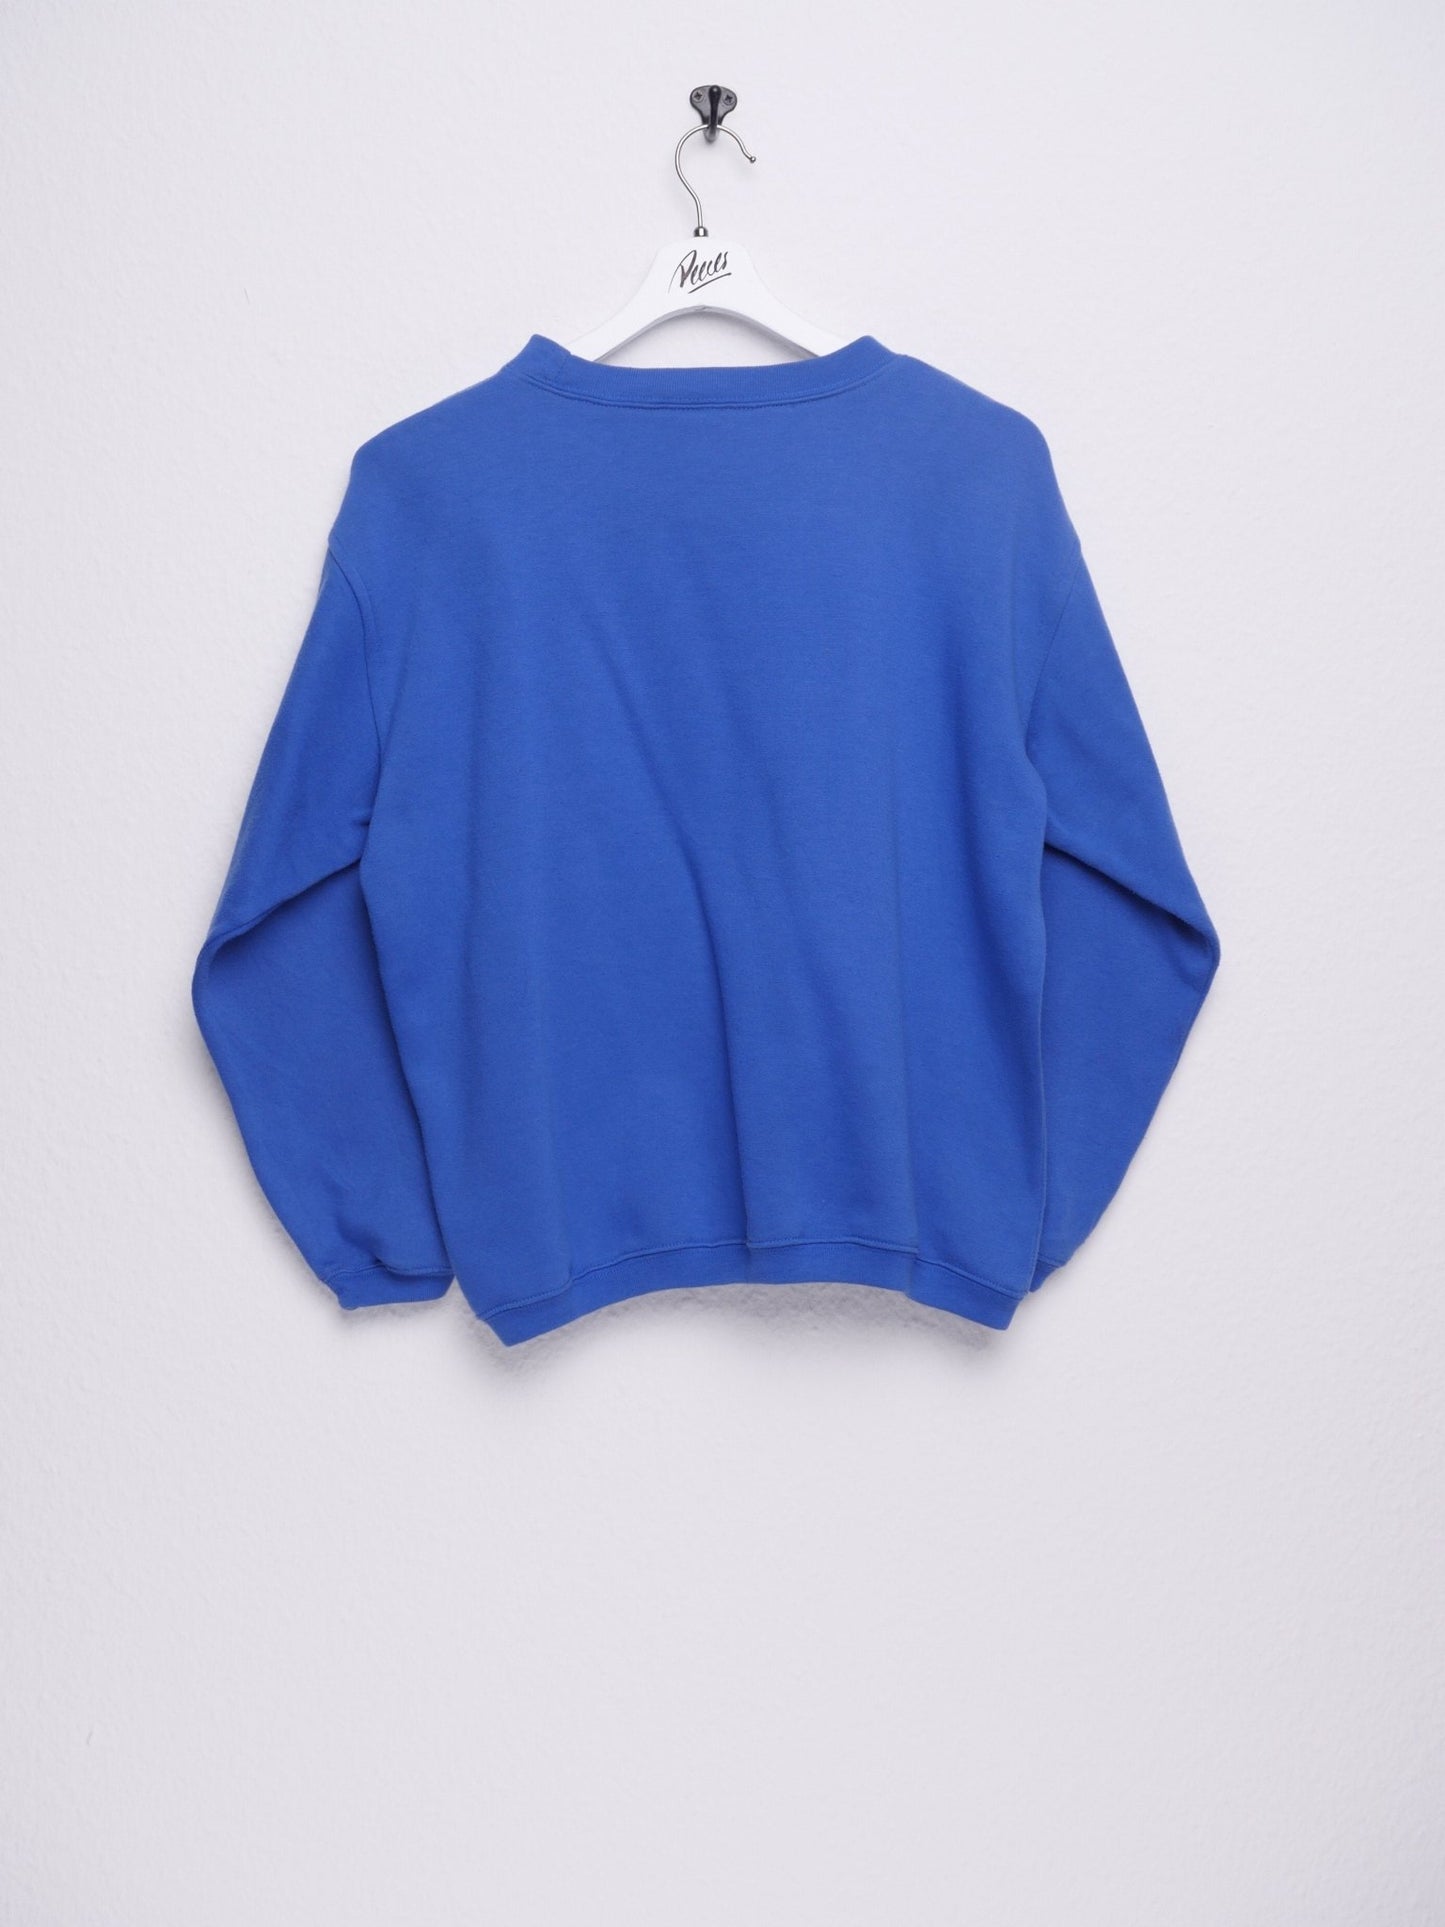 'Le Studio Sport' embroidered Spellout blue Sweater - Peeces